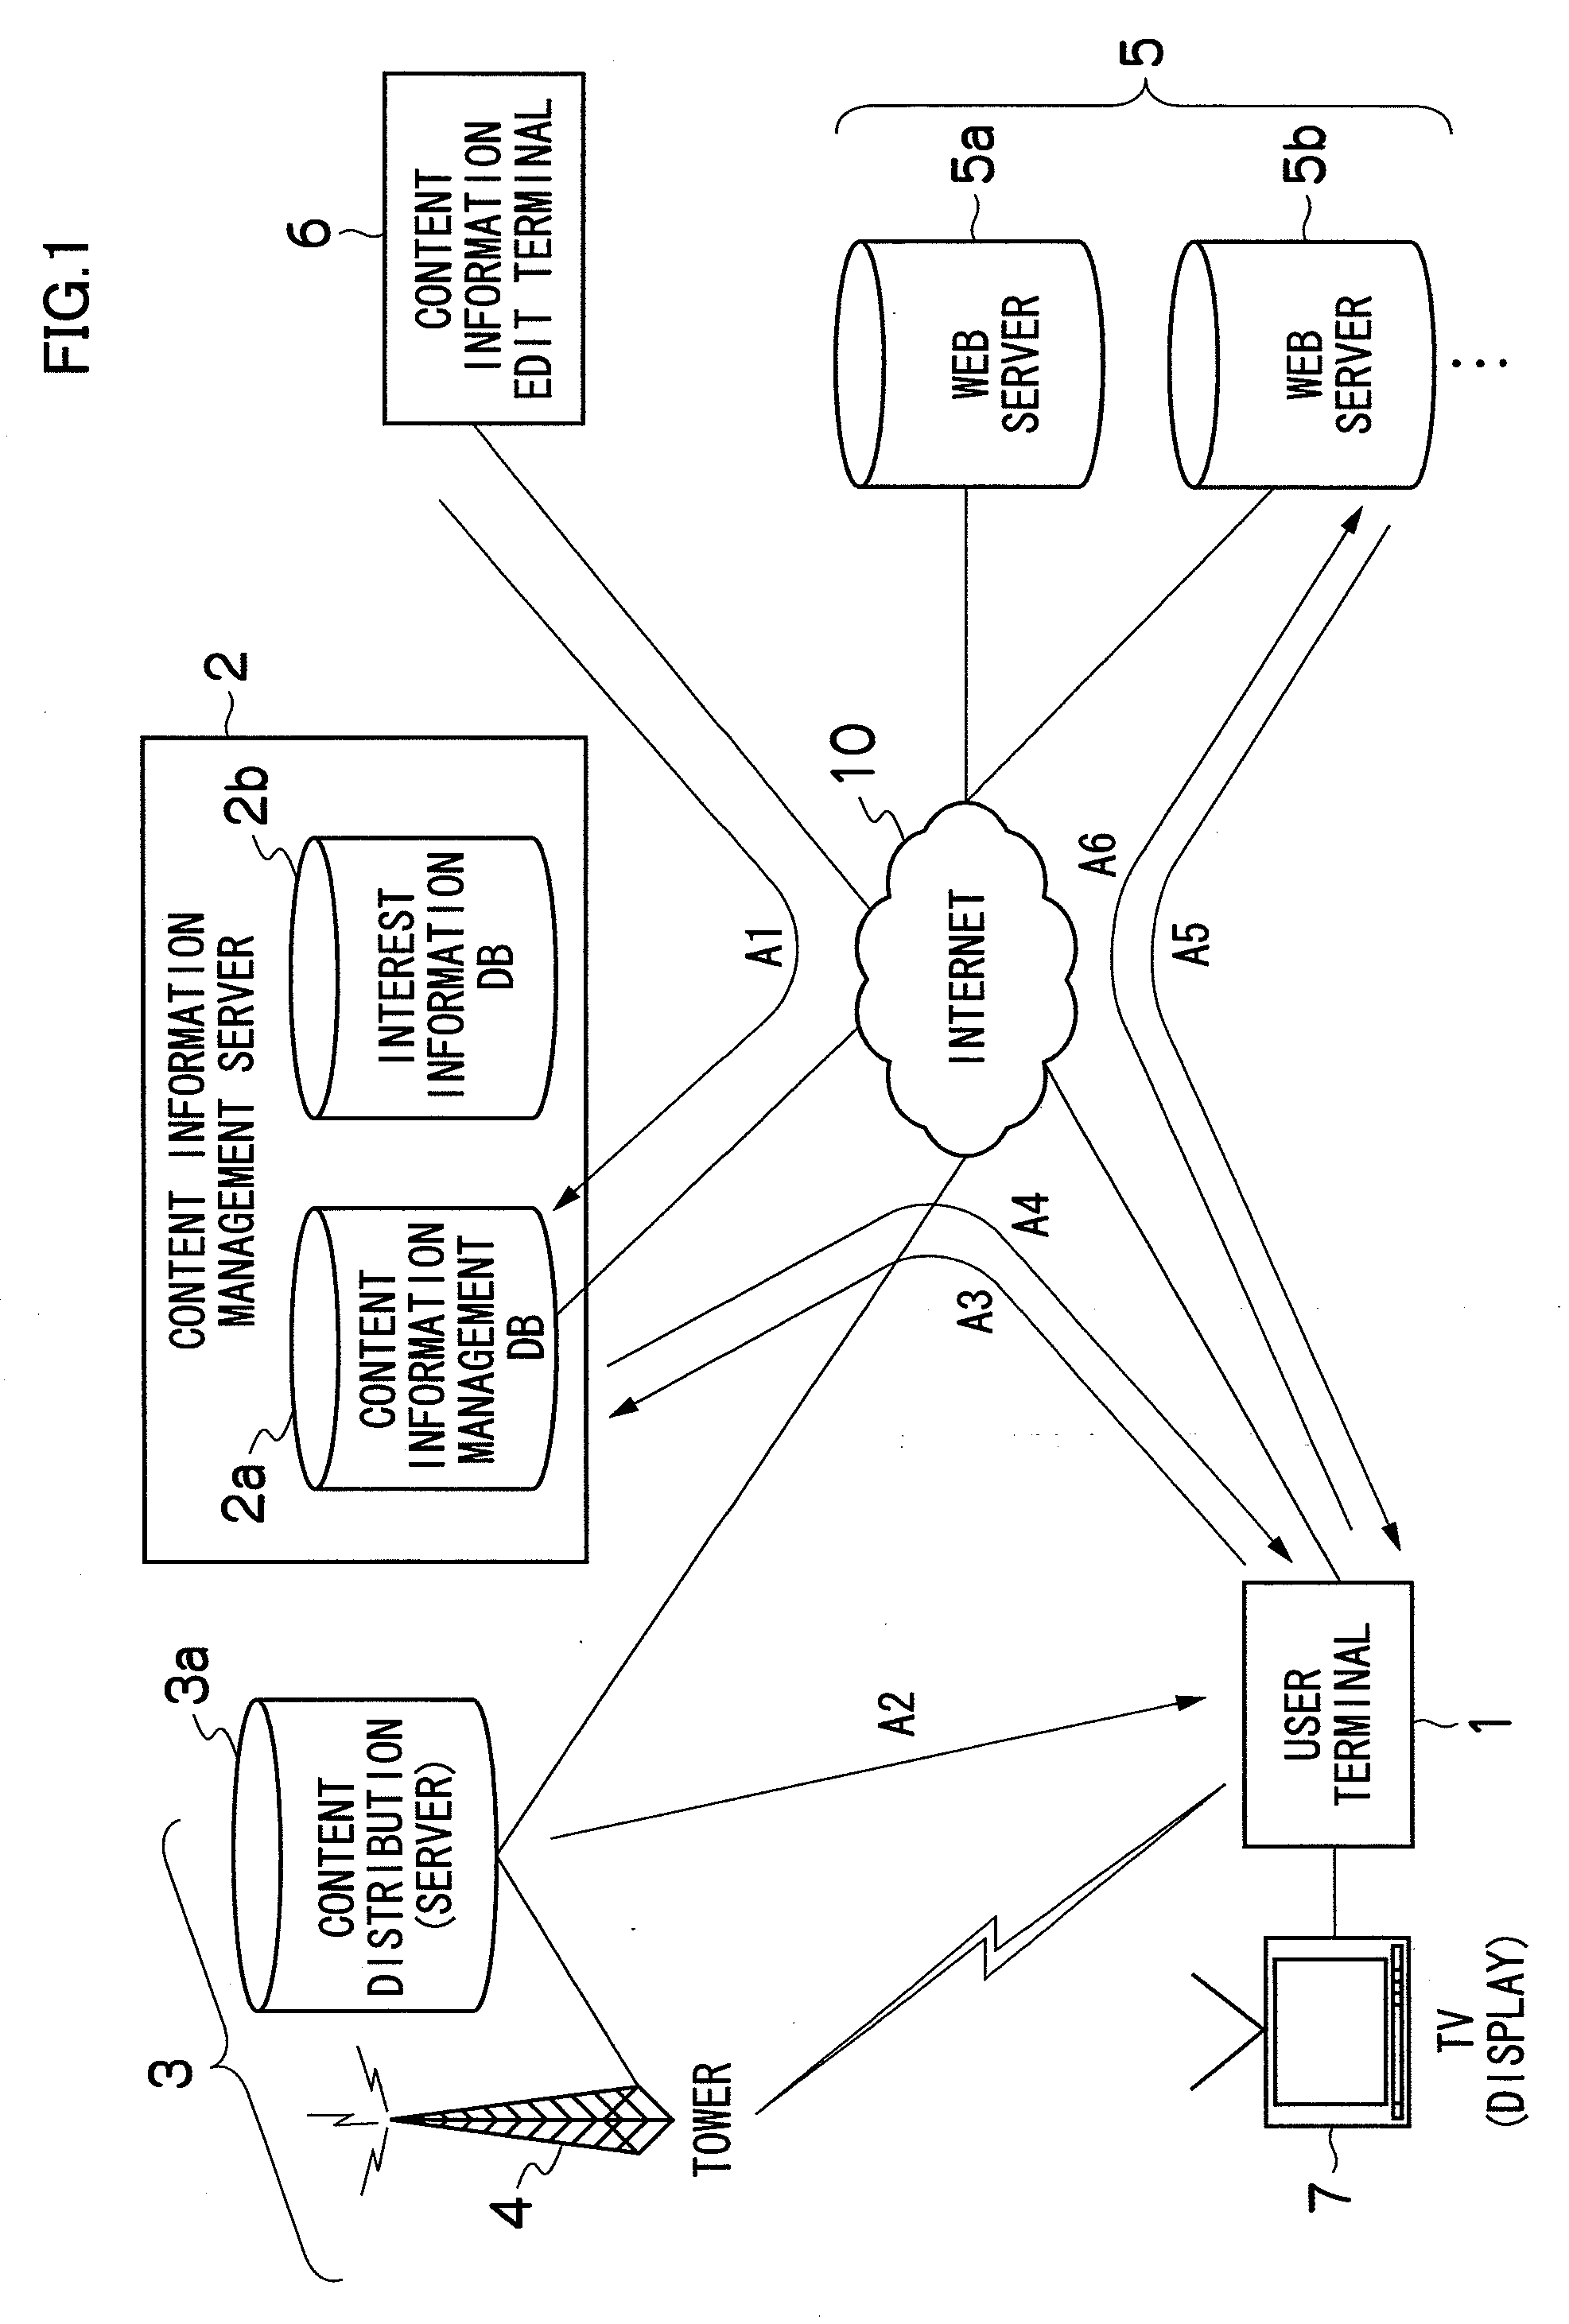 Method, apparatus and system for creating interest information